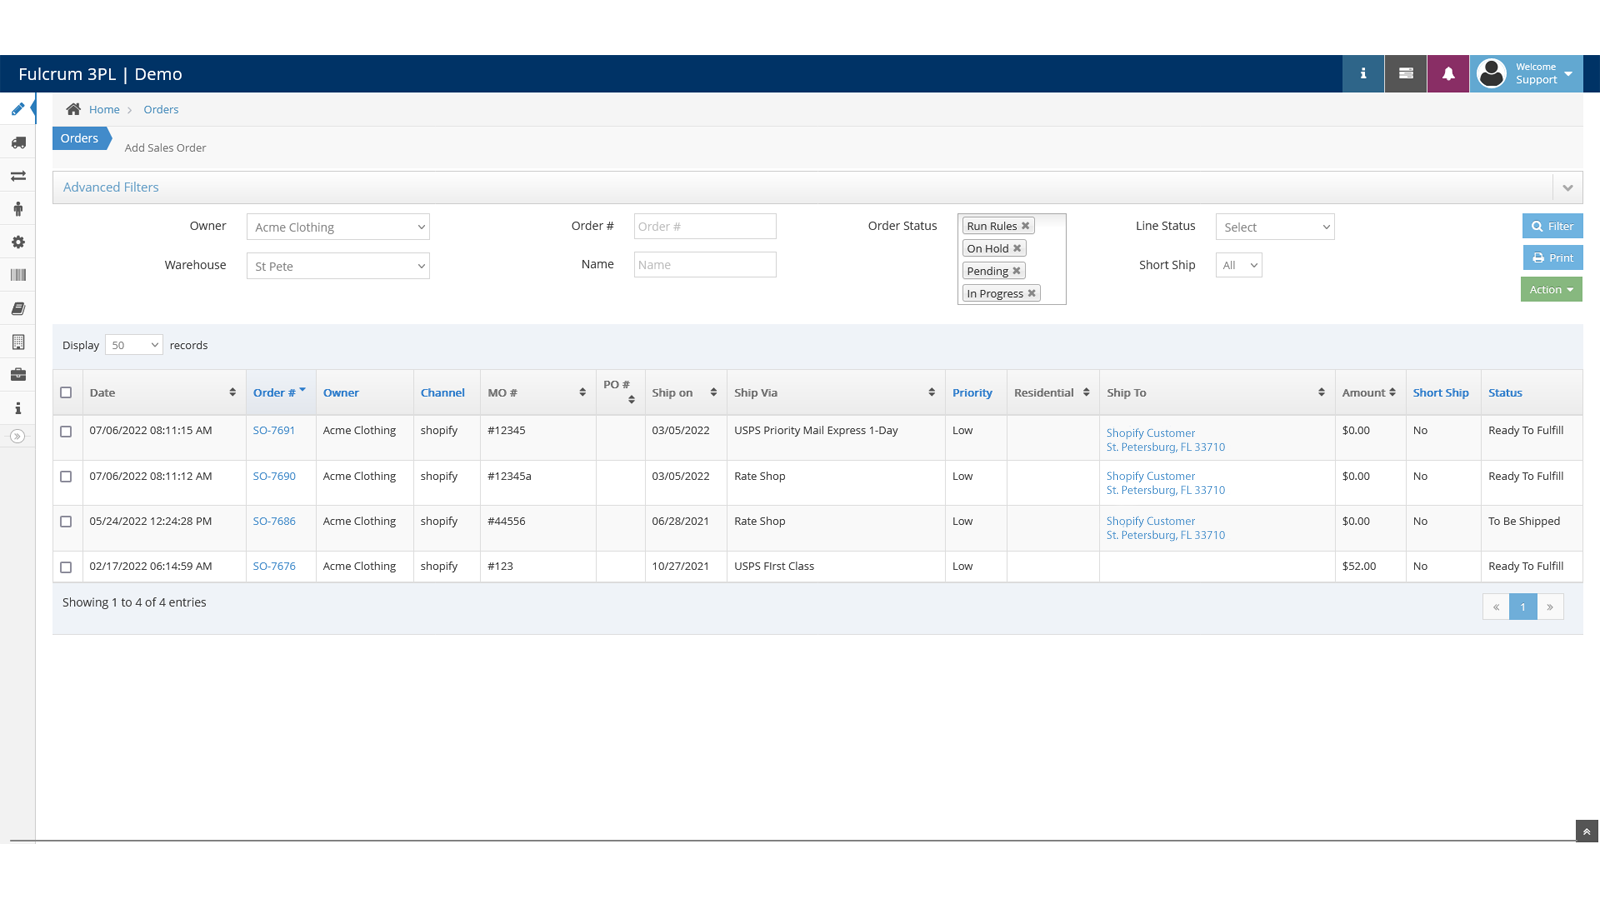 View orders and fulfillment status